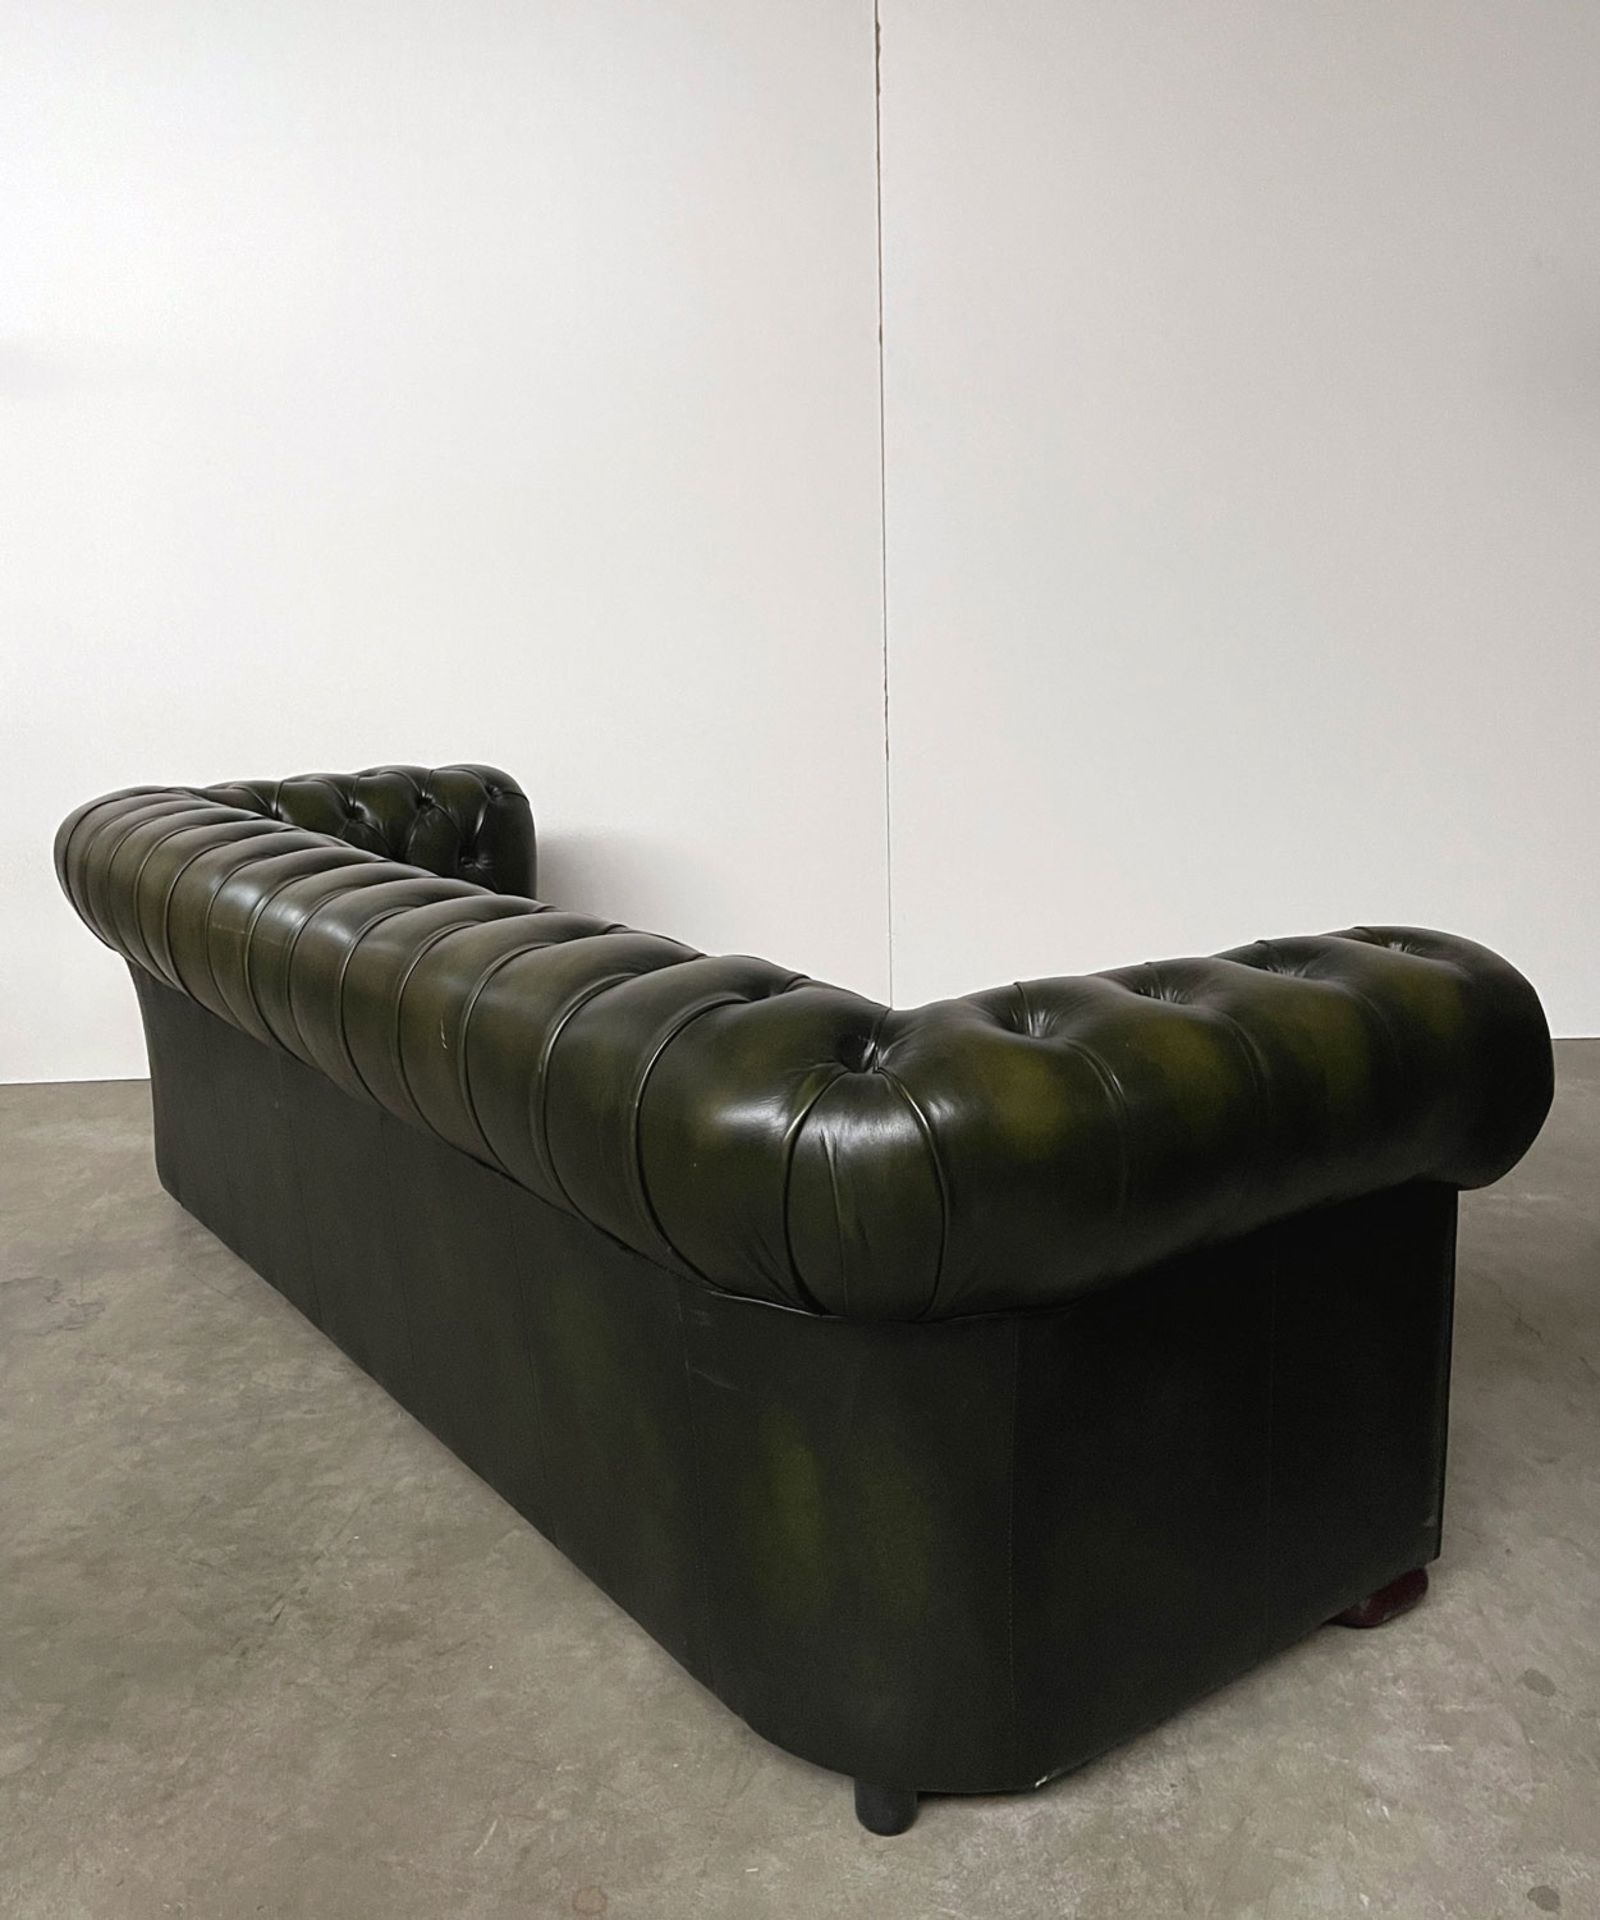 Green Leather Chesterfield Sofa - Image 4 of 10